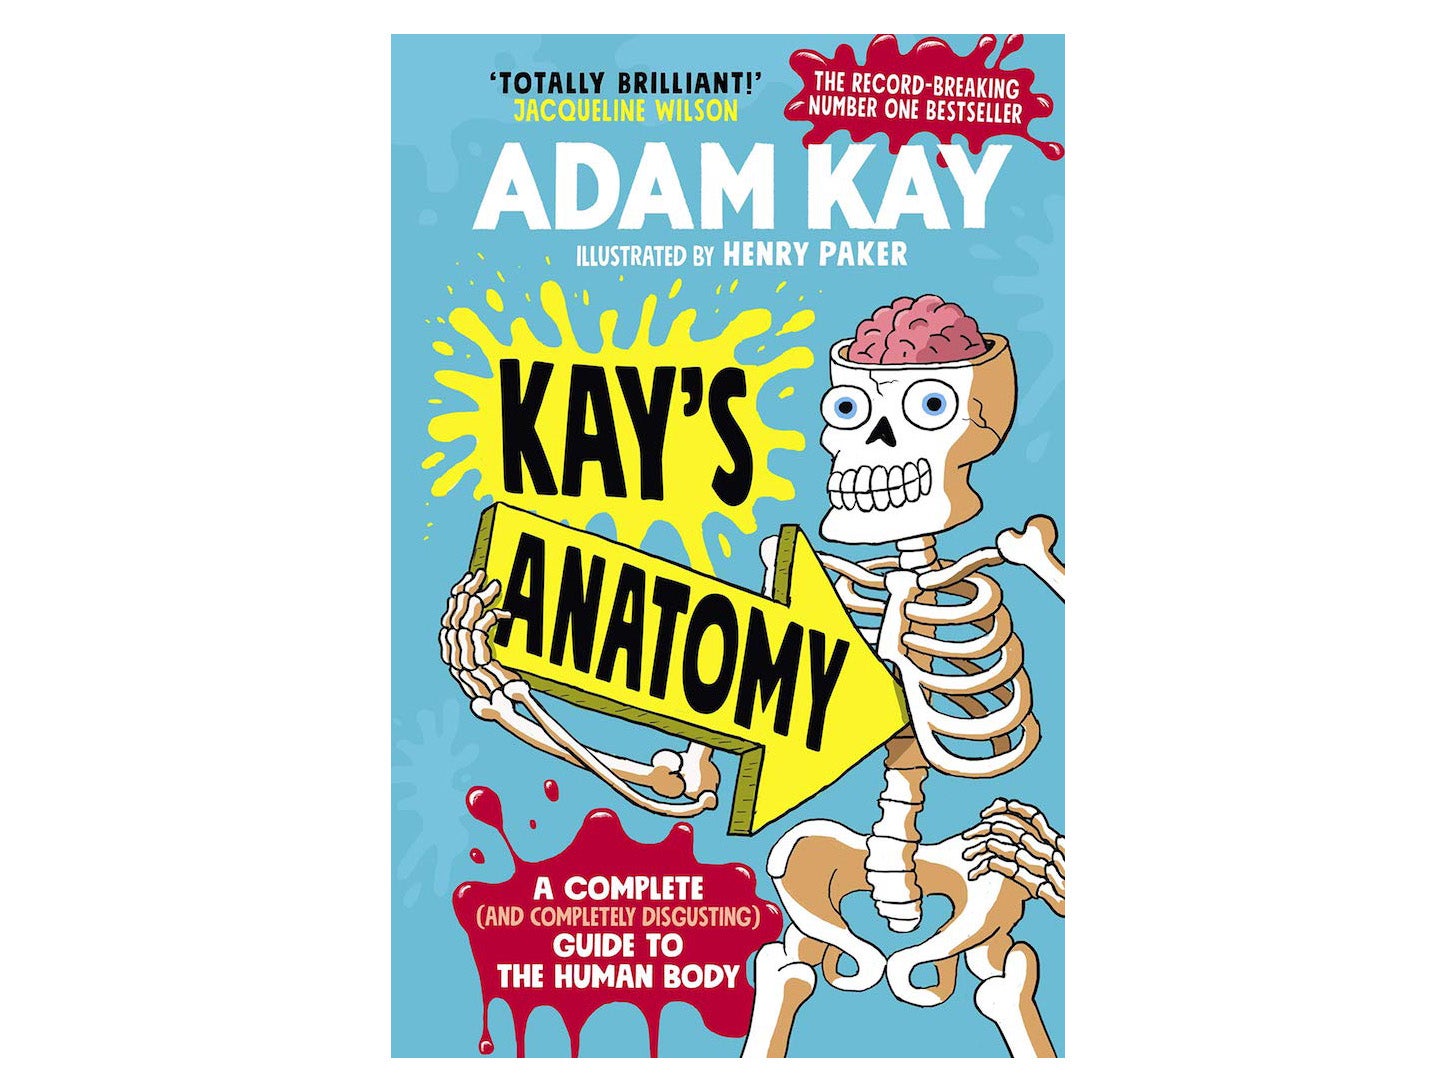 ‘Kay’s Anatomy’ by Adam Kay, published by Puffin.jpg